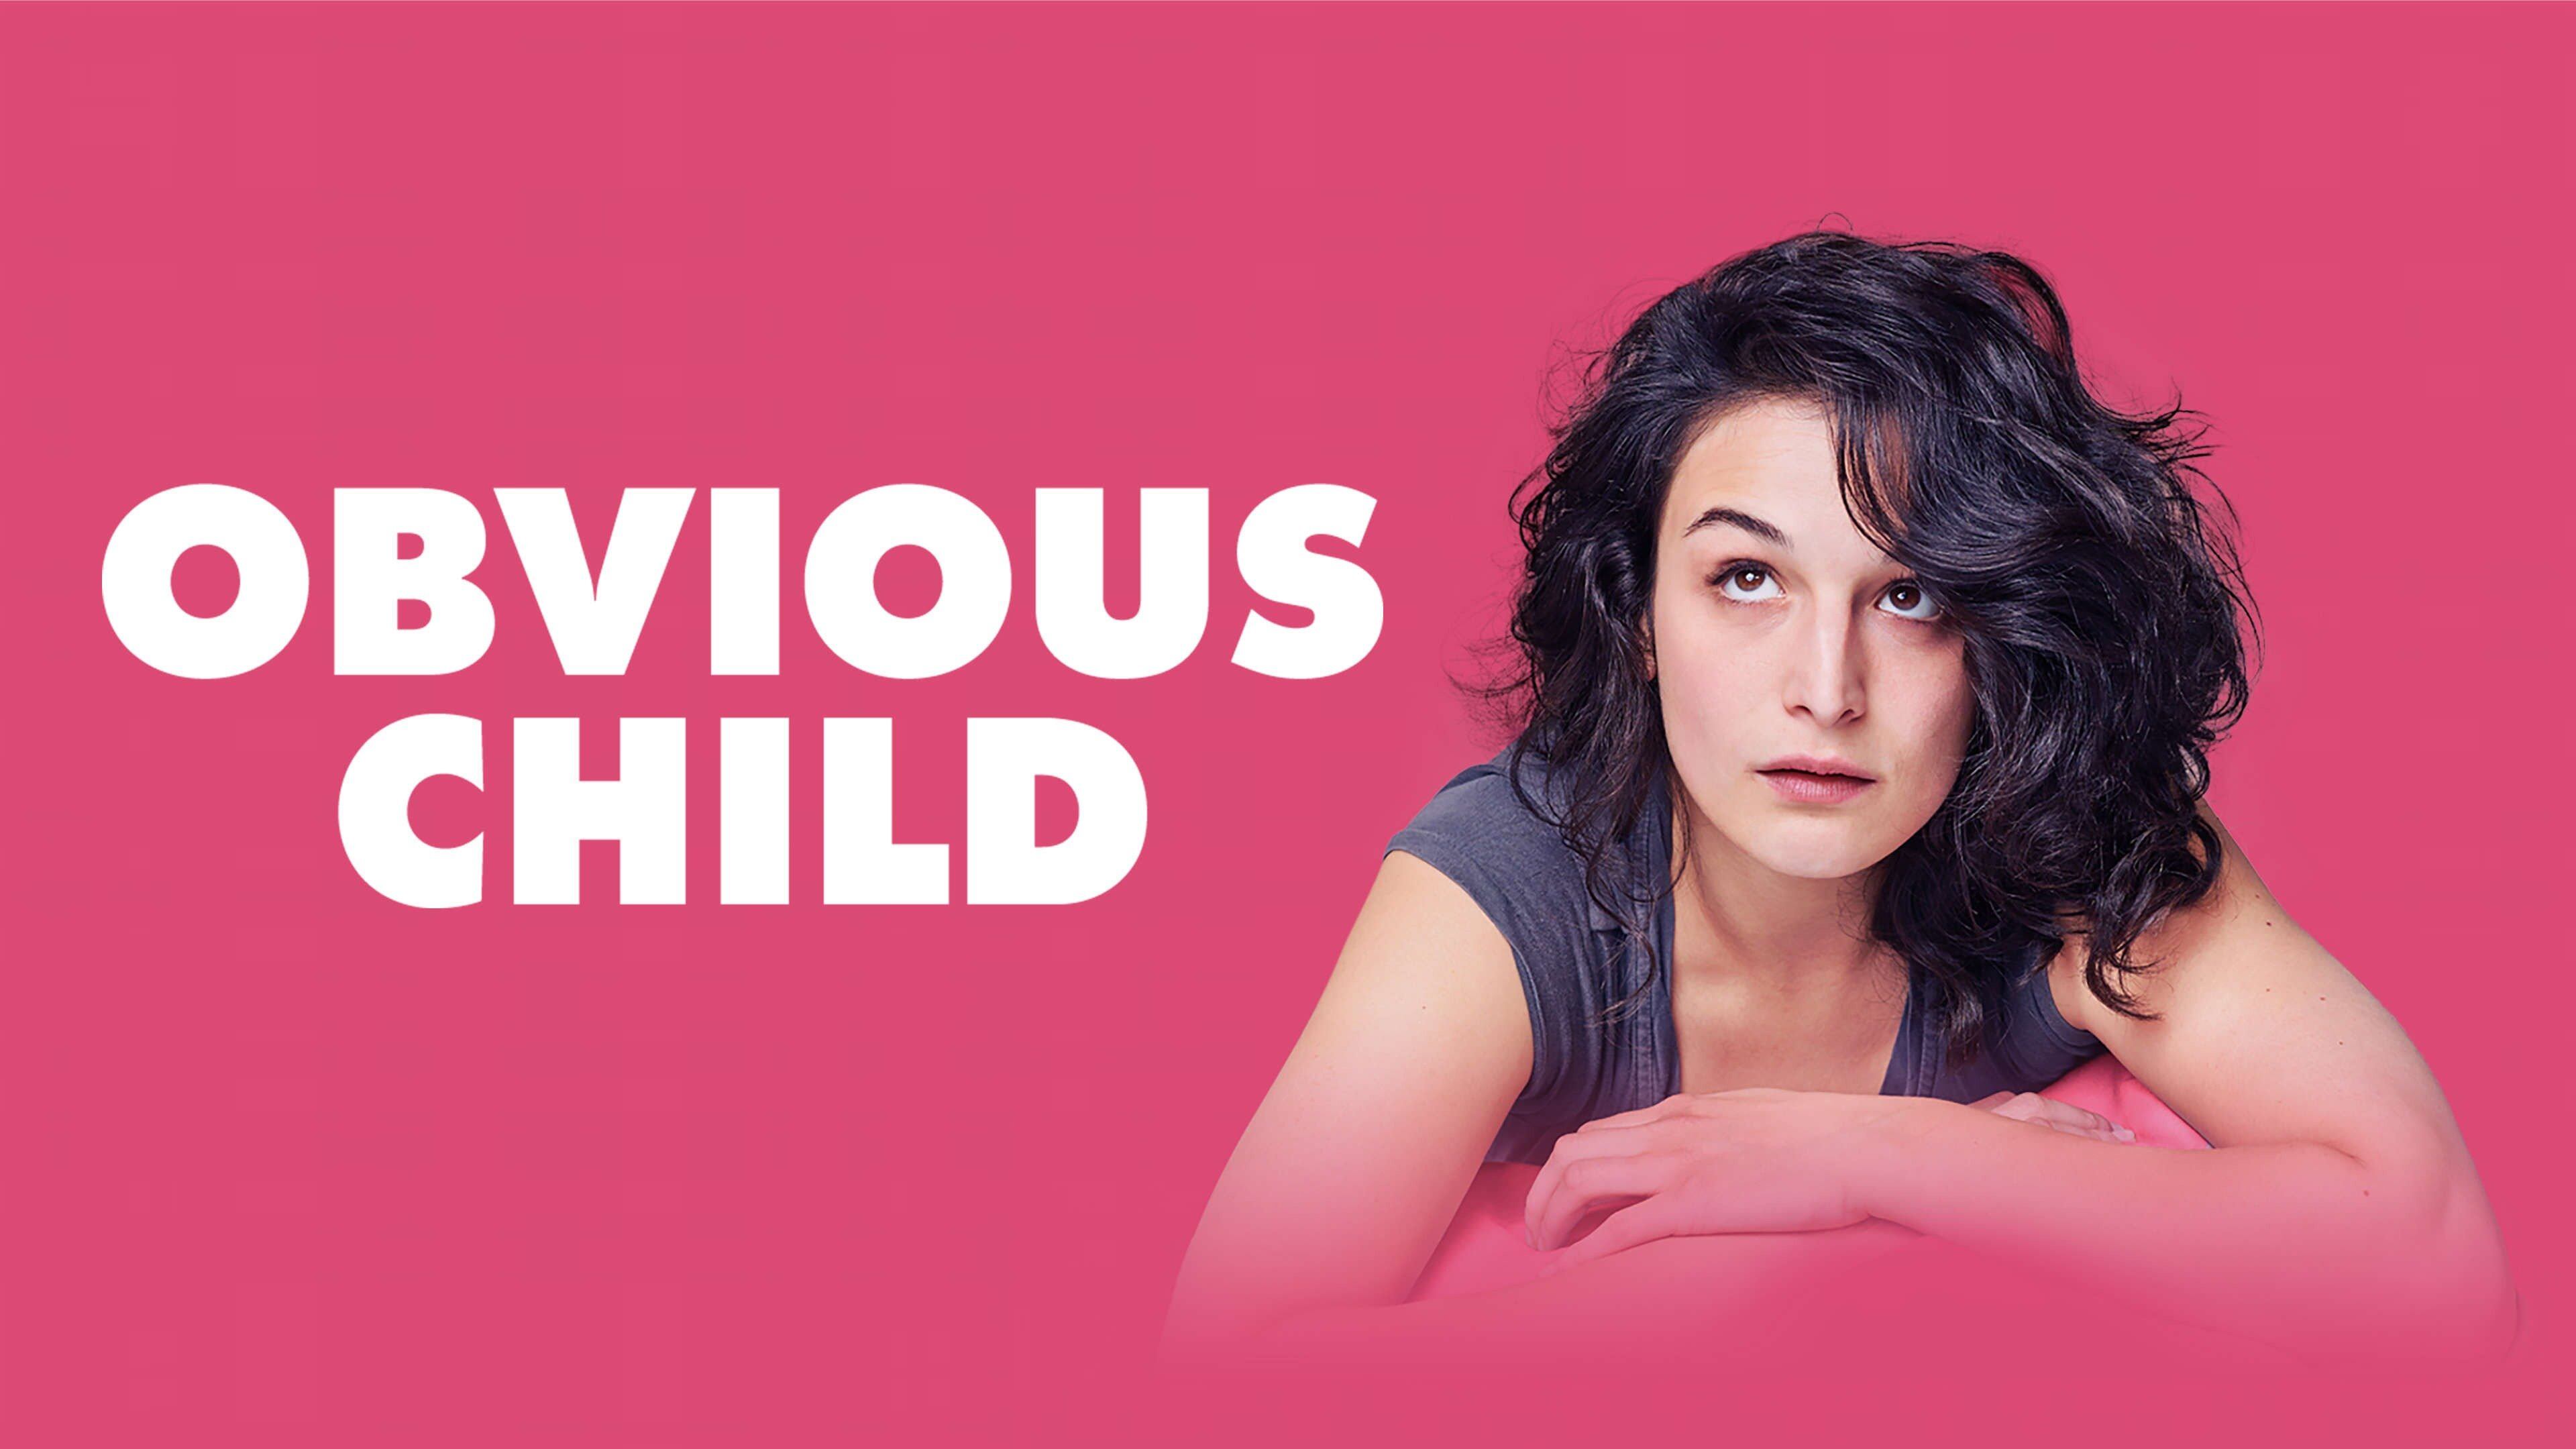 34-facts-about-the-movie-obvious-child